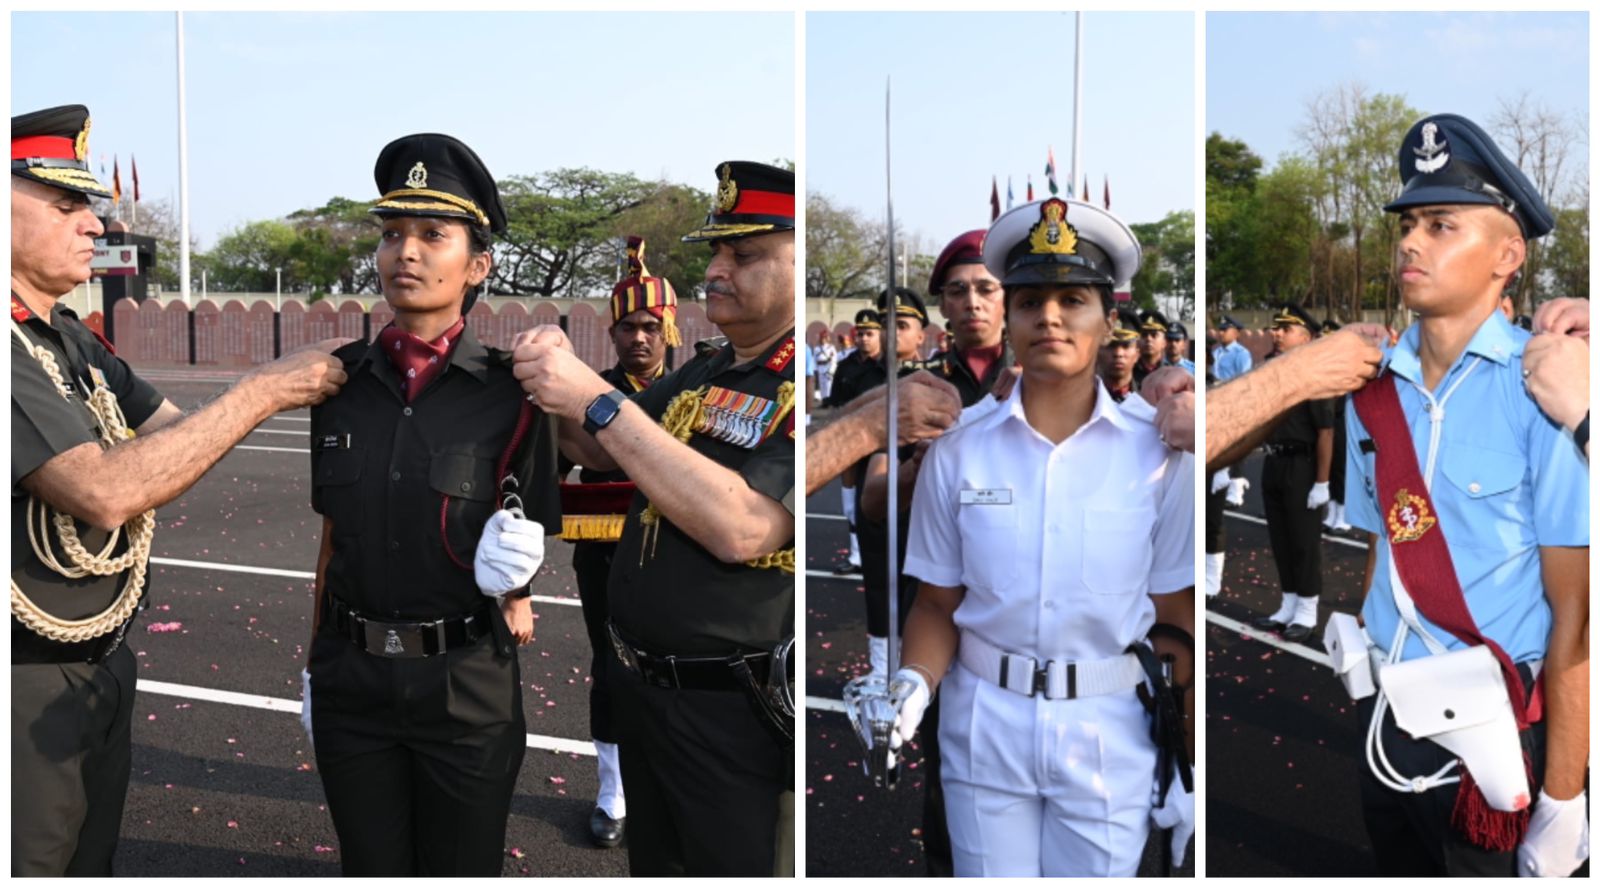 Passing out Parade of 58th Batch of Armed Forces Medical College held in Pune